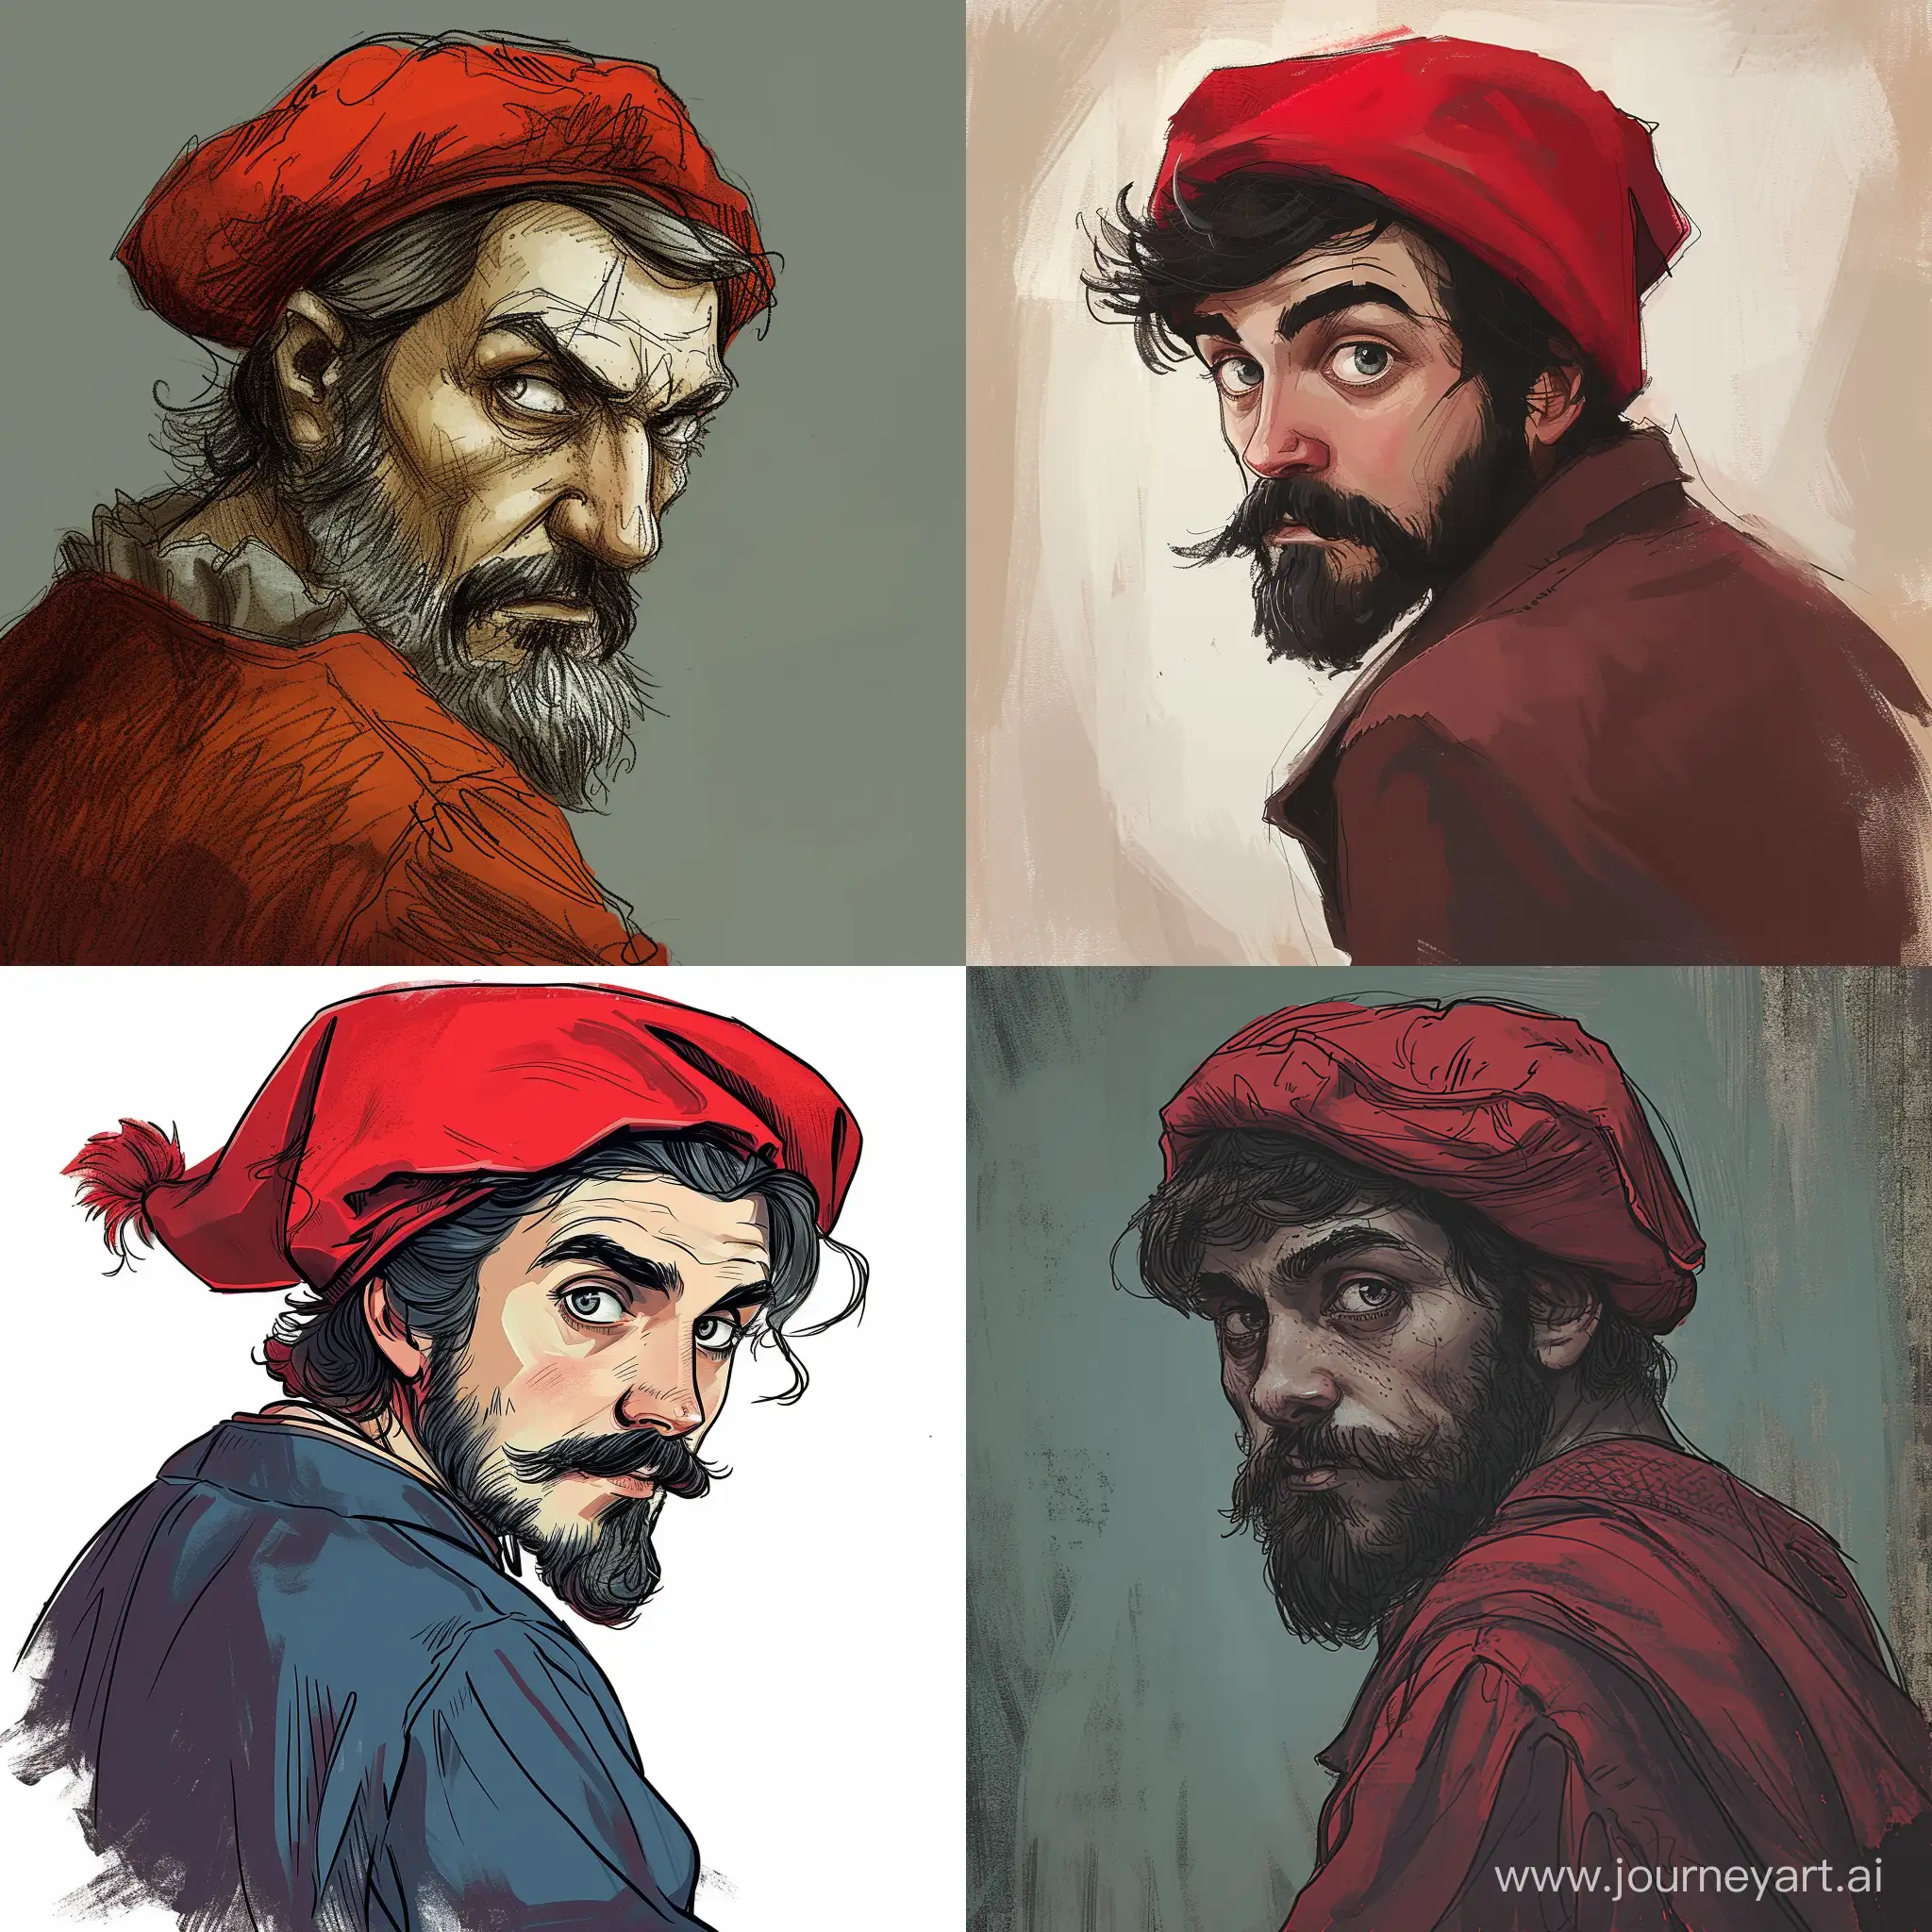 draw a picture of a guy with a beard and mustache, in a red hat, who looks back, he has gray eyes

